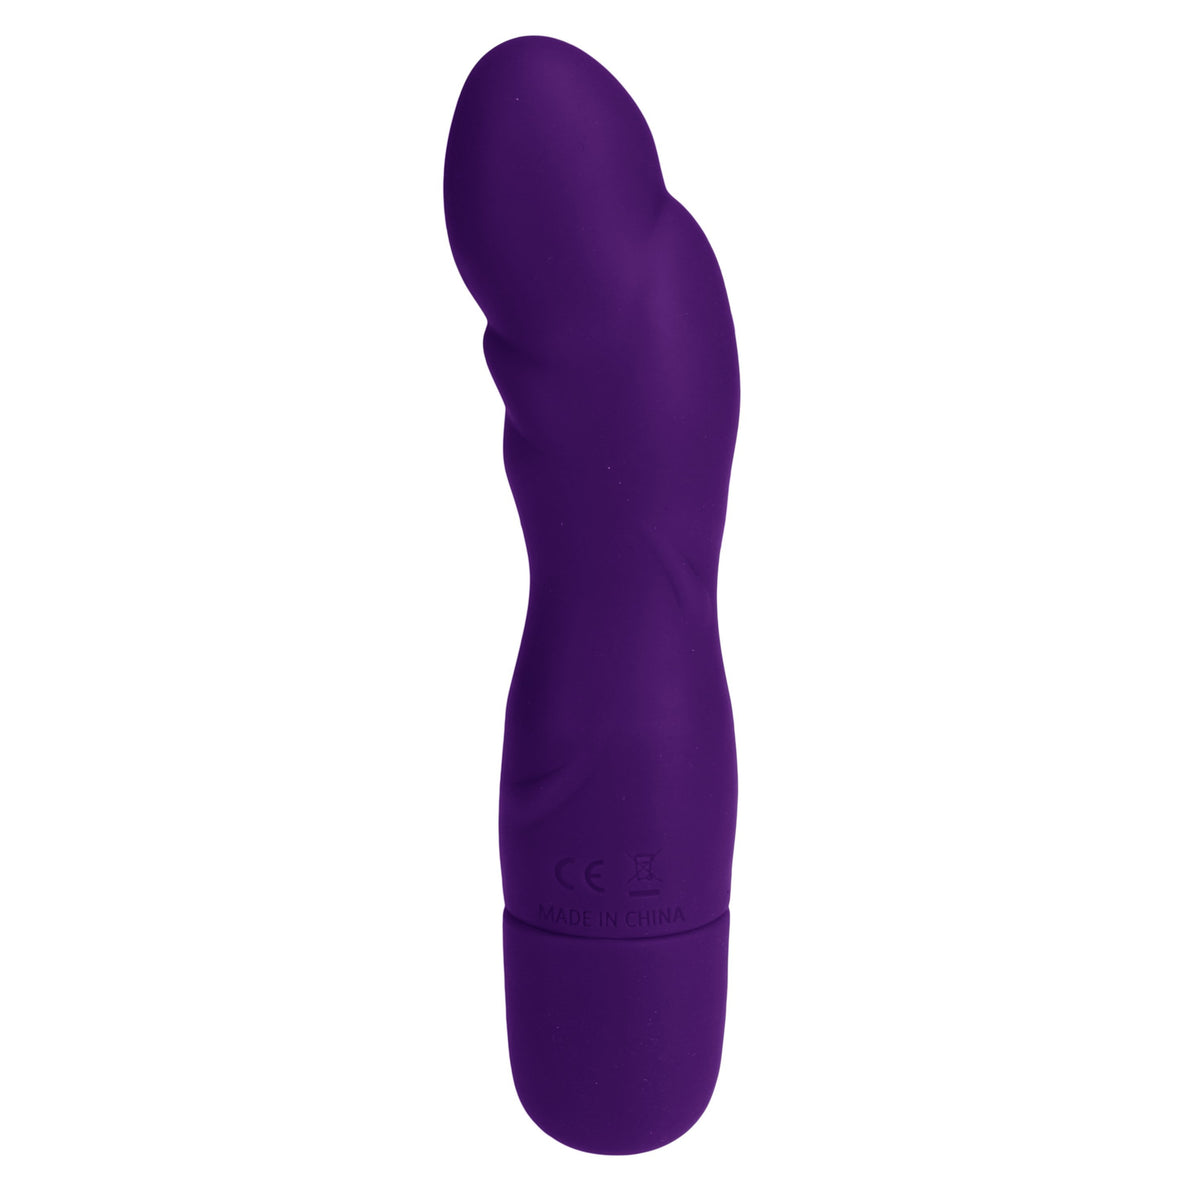 NMC First Night 5 inch Silicone 10 Function G-Spot Vibe with Ripples - Purple